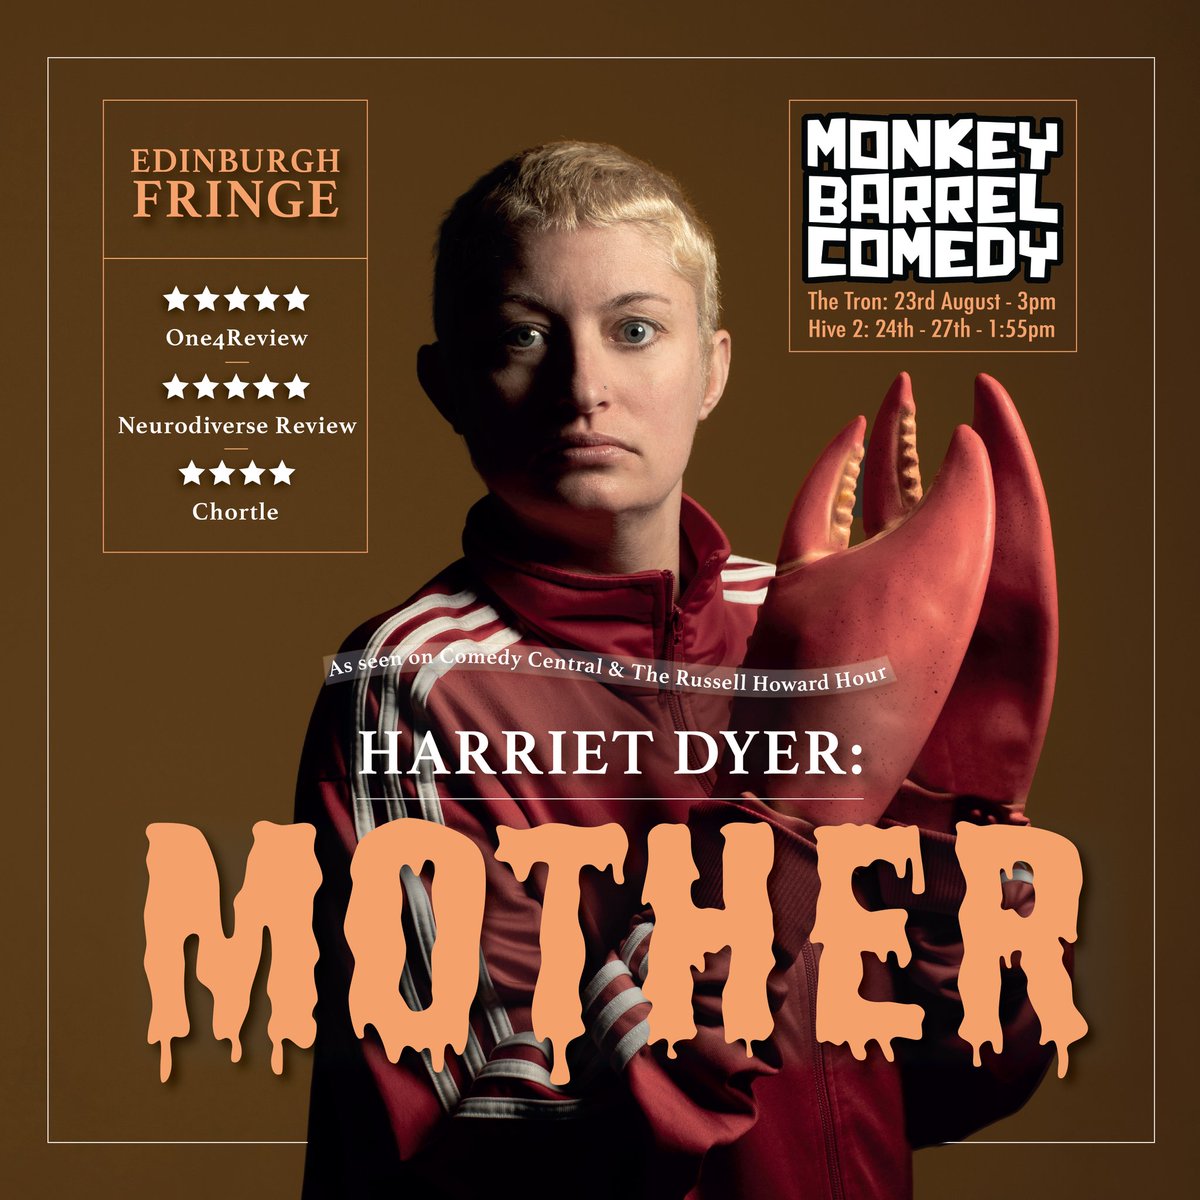 A week today until I bring my new show to @edfringe with @BarrelComedy . It'd make my chuffin' month to have full rooms so do consider coming along yes please? 

tickets.edfringe.com/whats-on#q=Har… 🦞

#edfringe #monkeybarrel #comedy #funny #newshow #mother